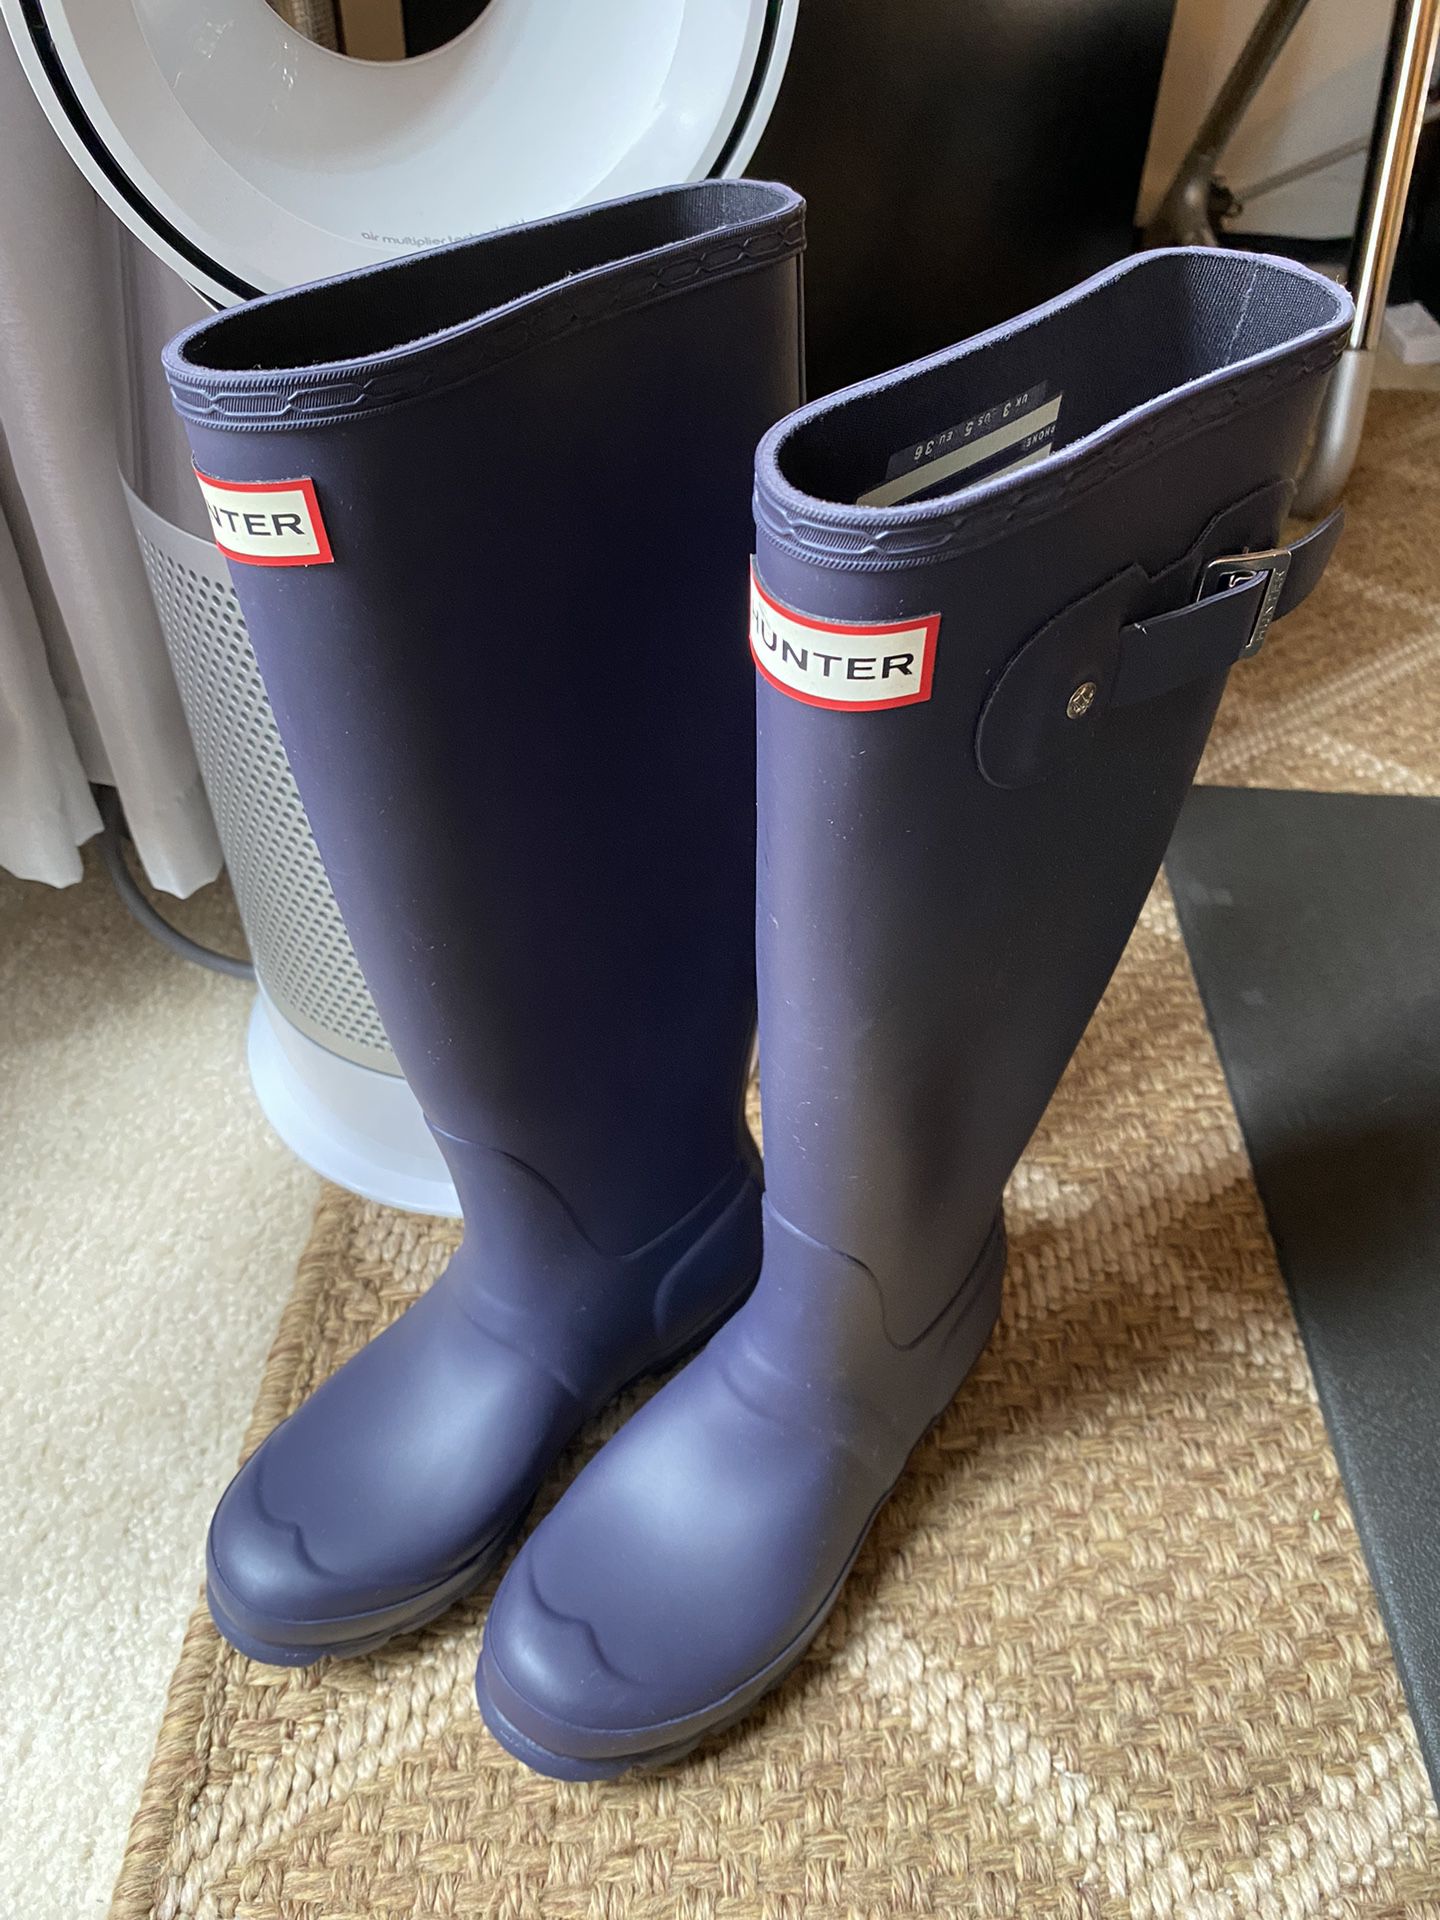 Hunter Original Tall Womens Rubber Rain Boots - Black -Women size 5 Color Dark Blue   New without tag with store size sticker.